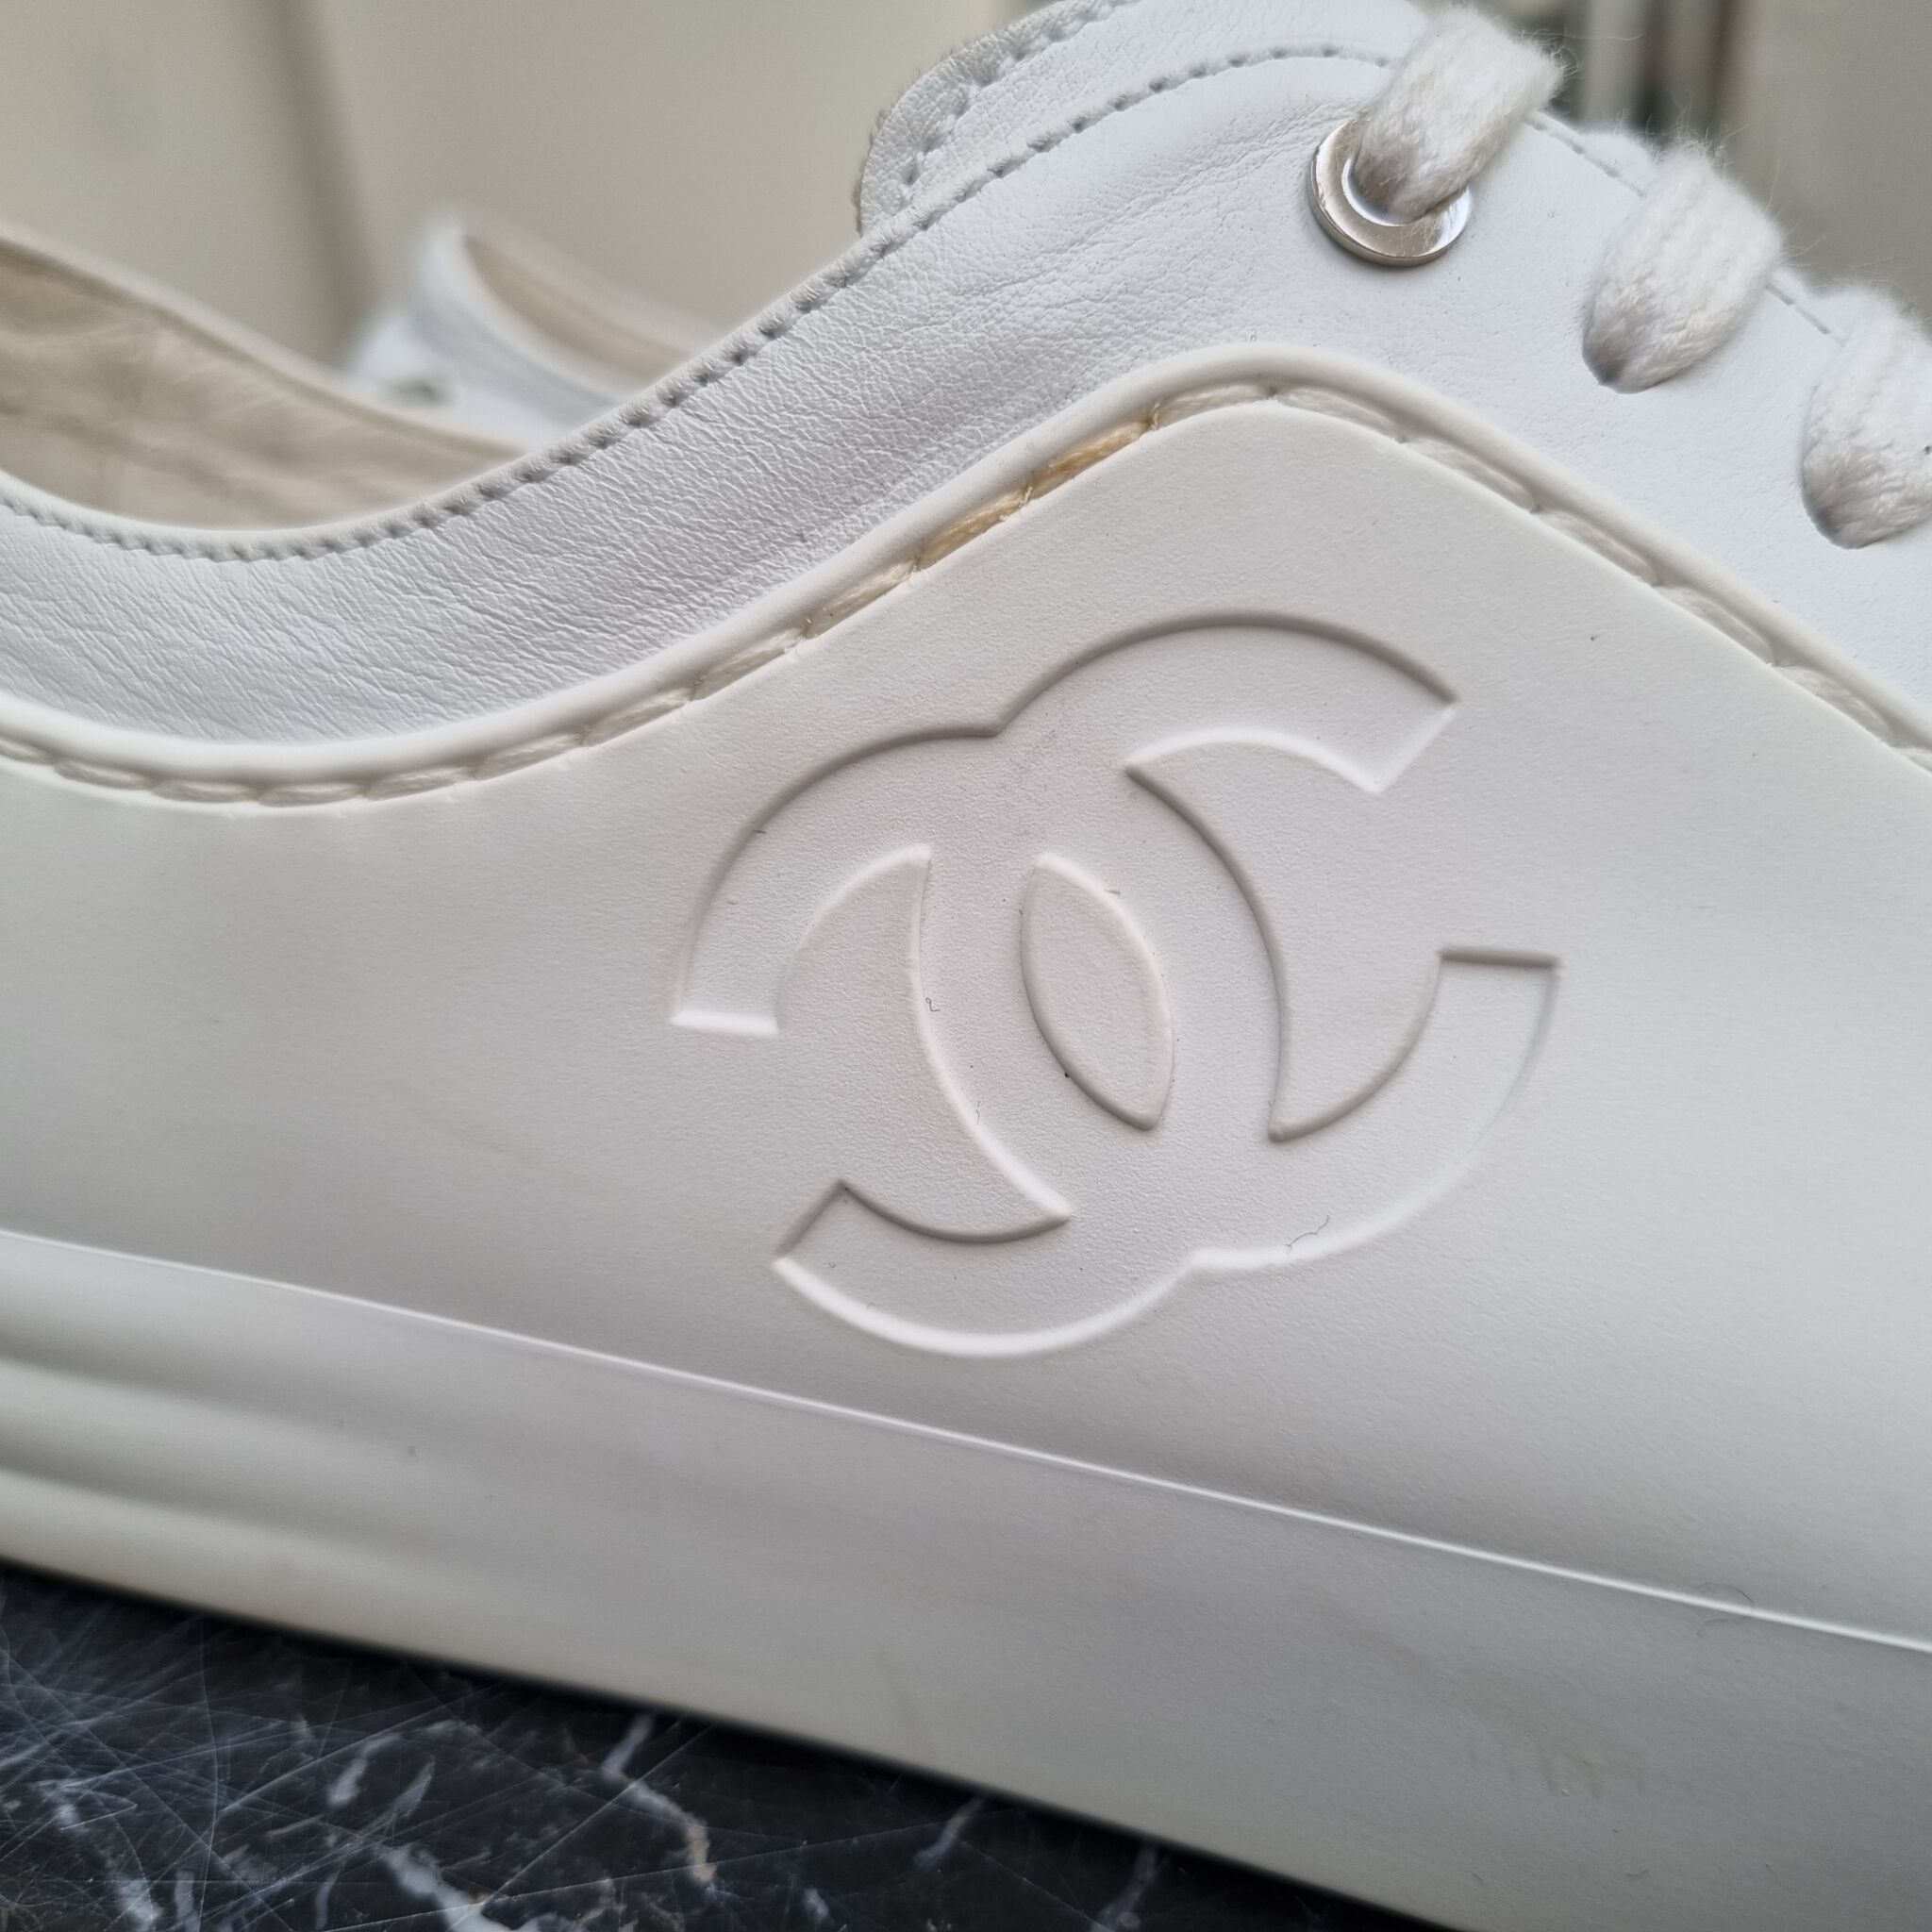 Womens Chanel Sneakers from 700  Lyst